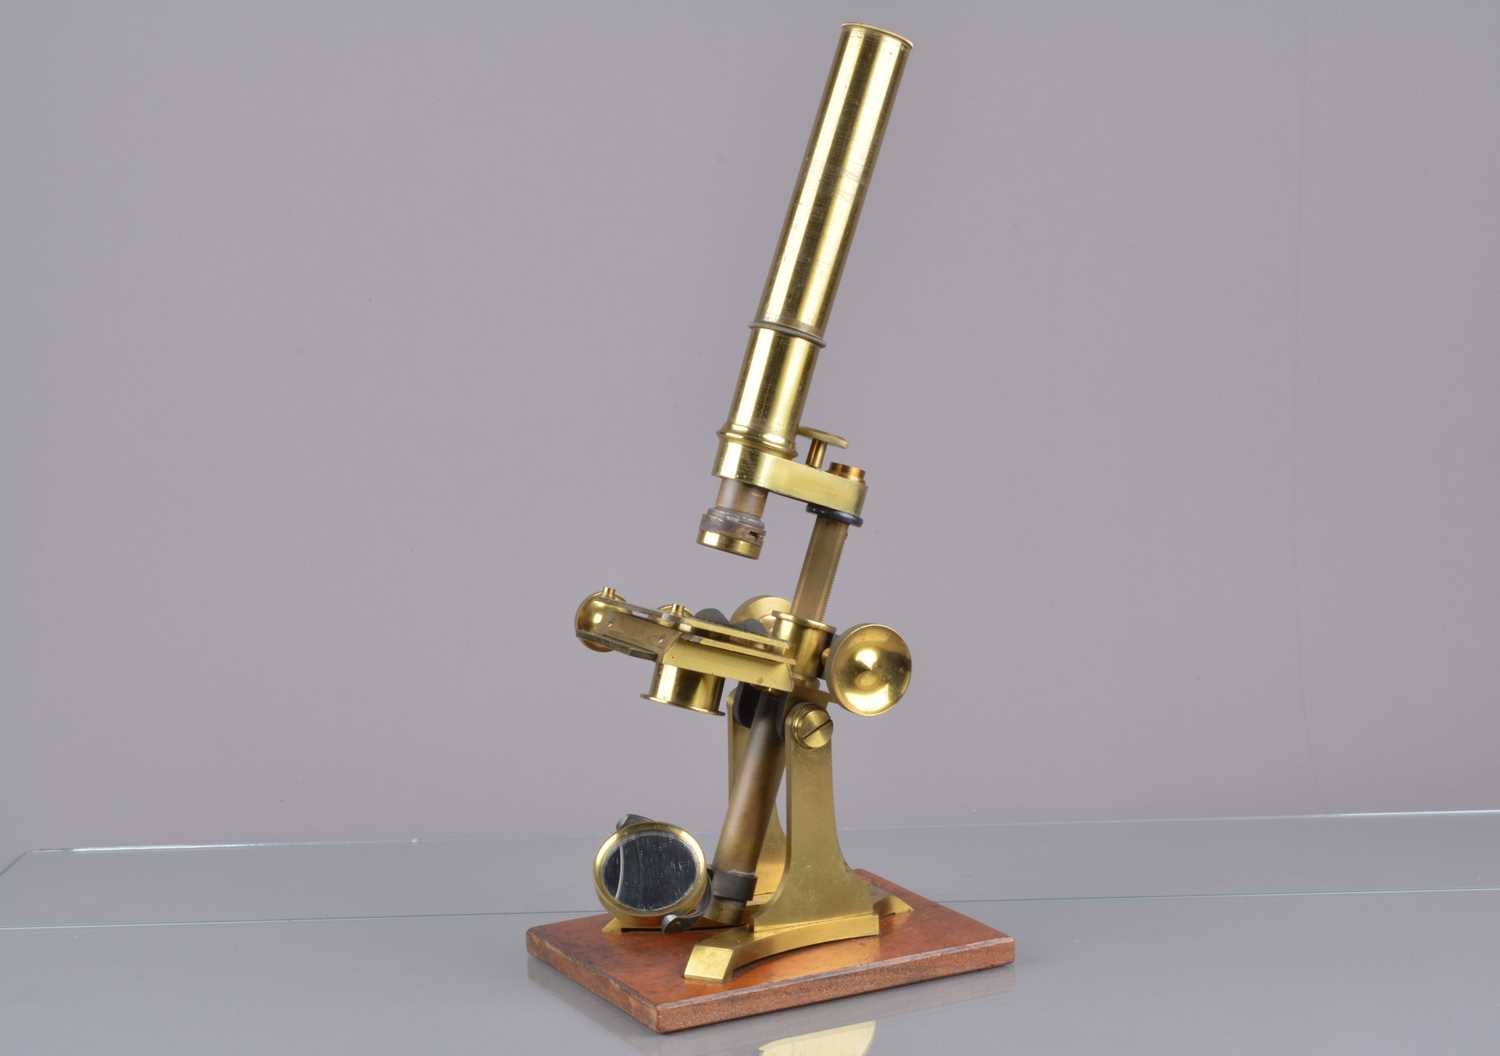 Lot 12 - A 19th Century lacquered brass Compound Monocular Microscope